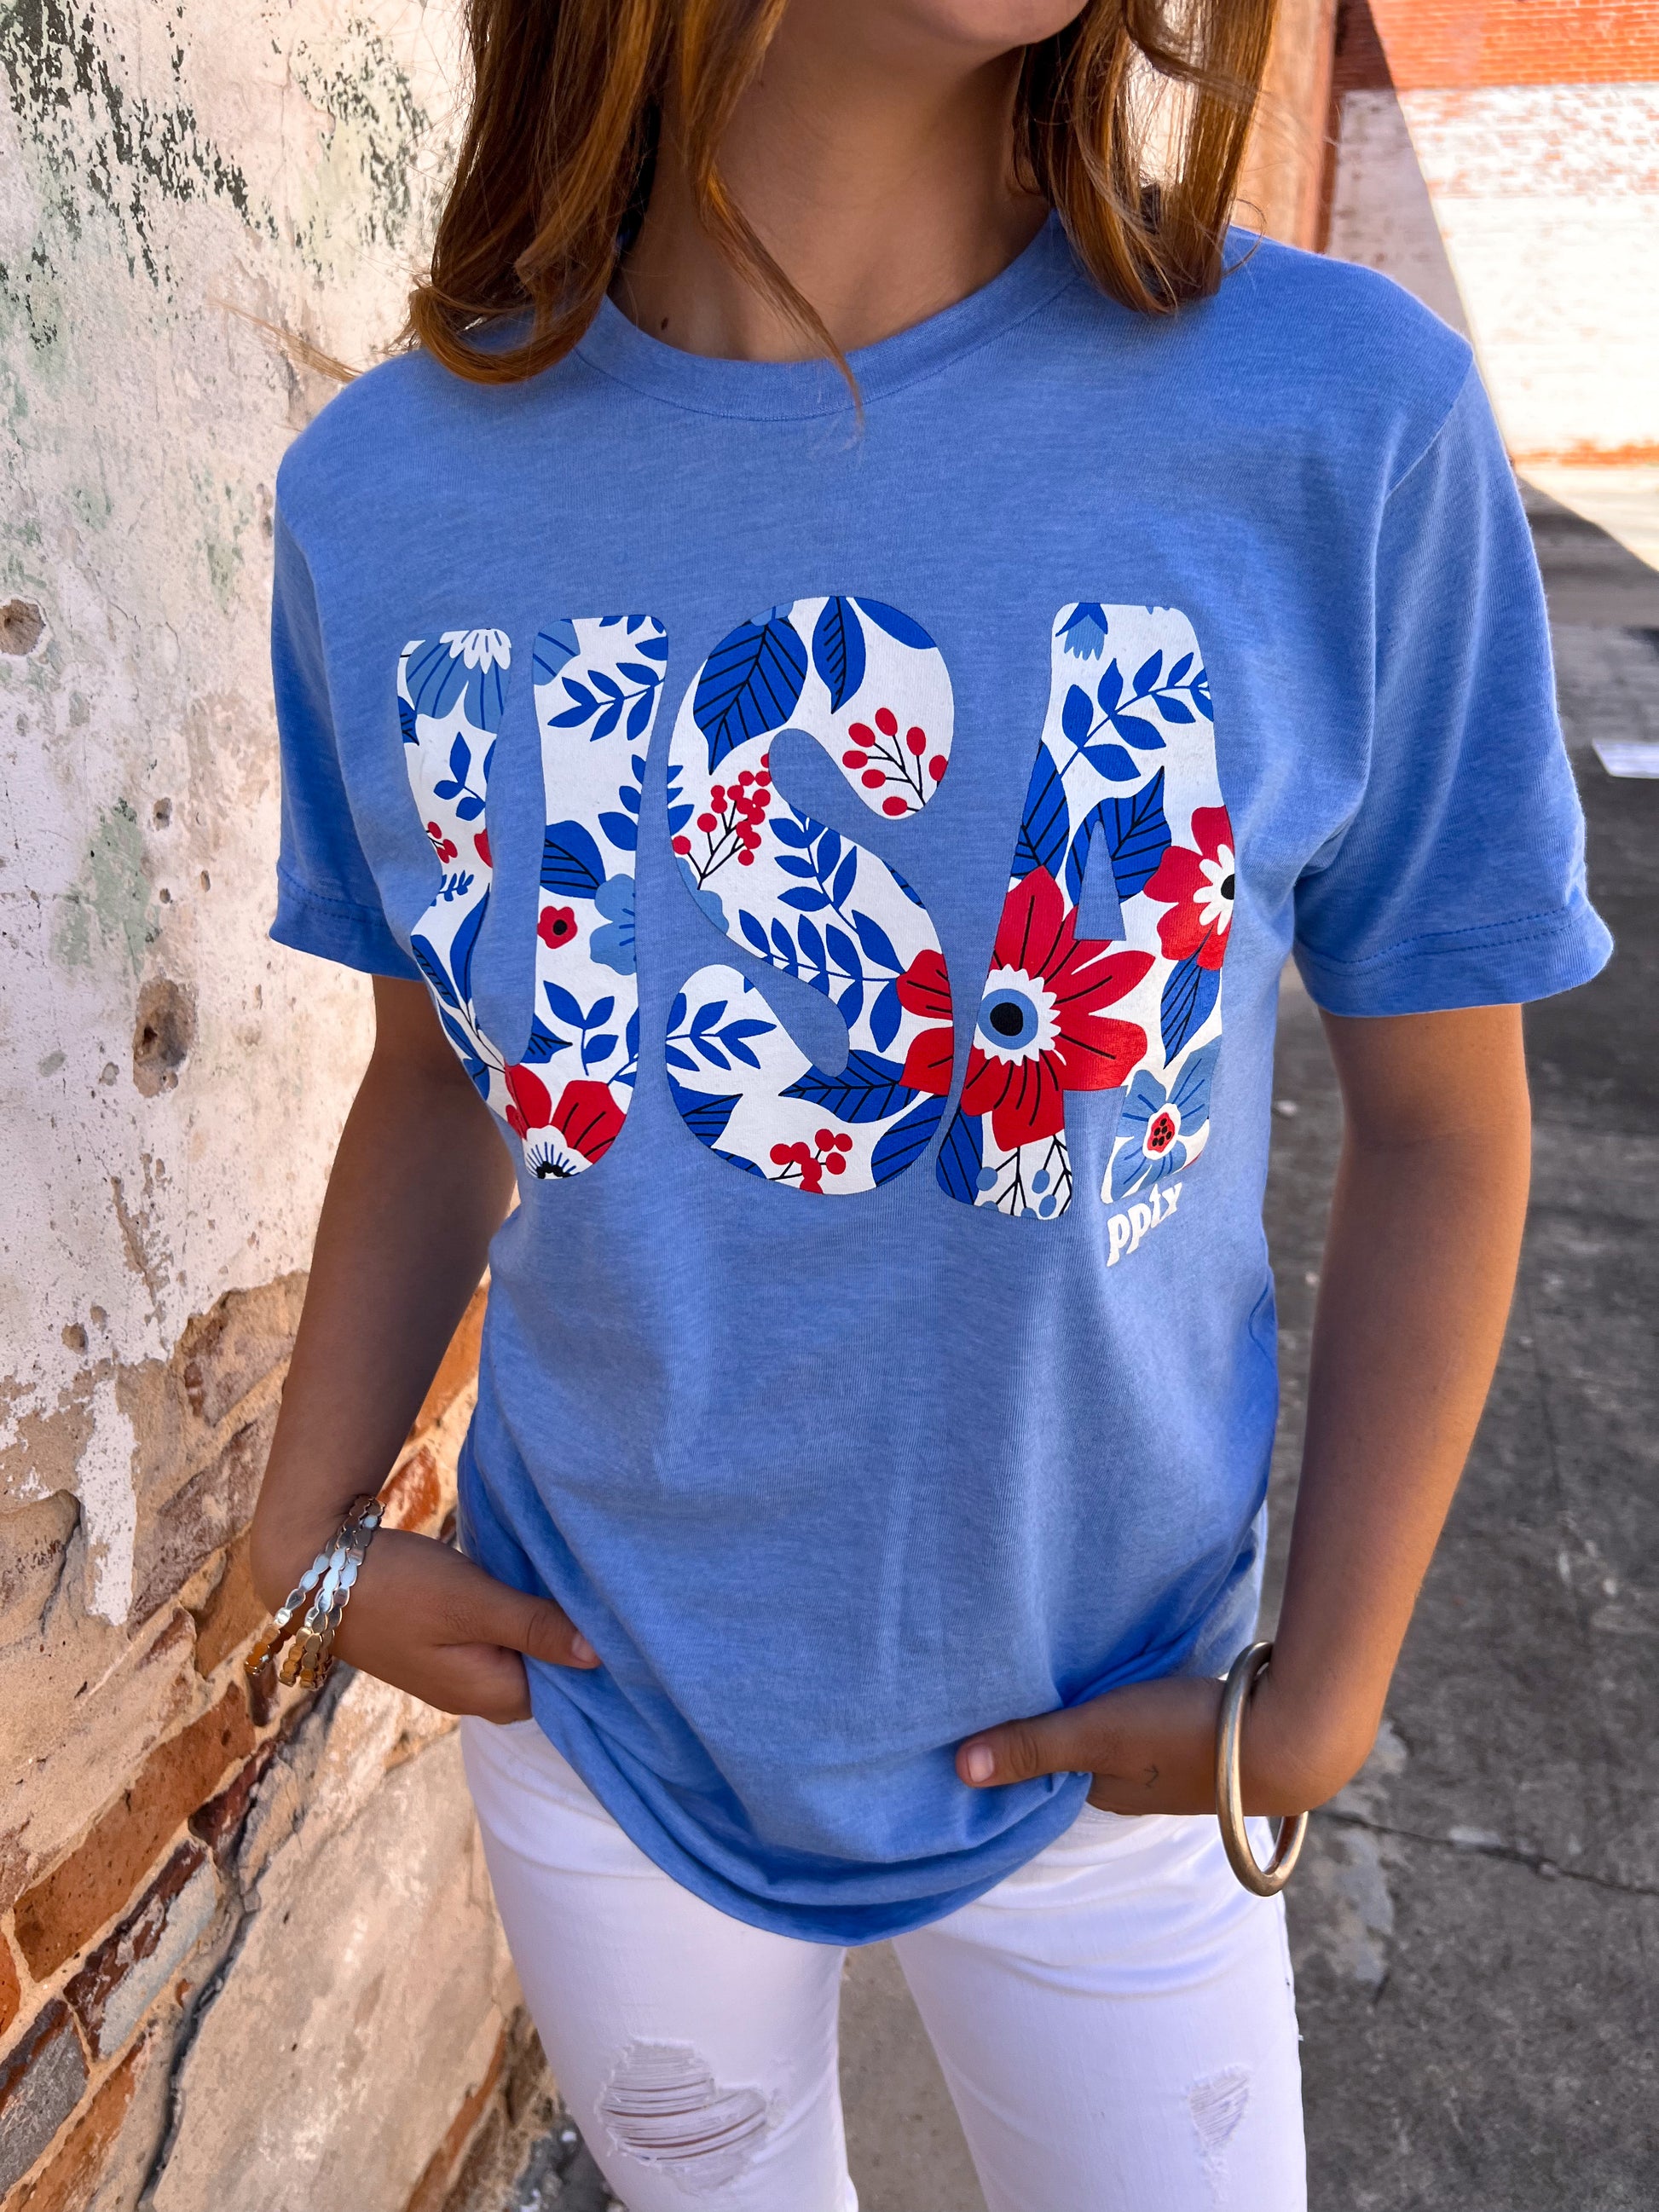 USA Graphic Tee-Apparel & Accessories-Prickly Pear TX-BIN A5-The Twisted Chandelier